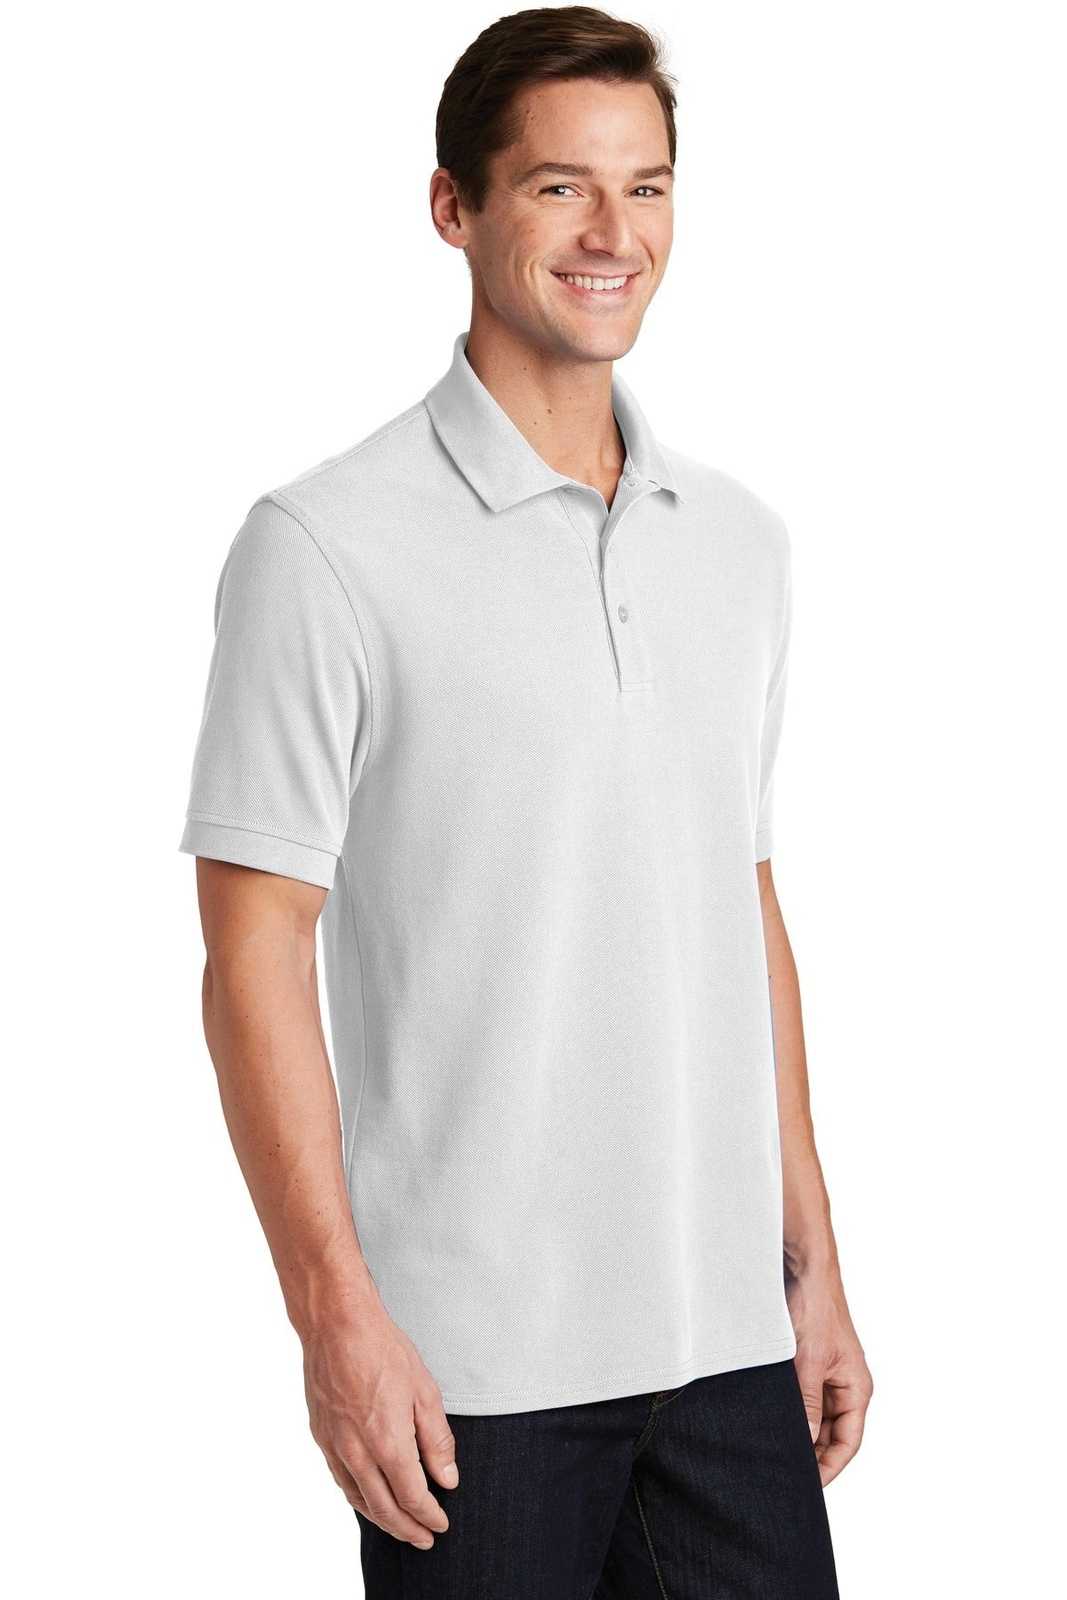 Port &amp; Company KP1500 Combed Ring Spun Pique Polo - White - HIT a Double - 4